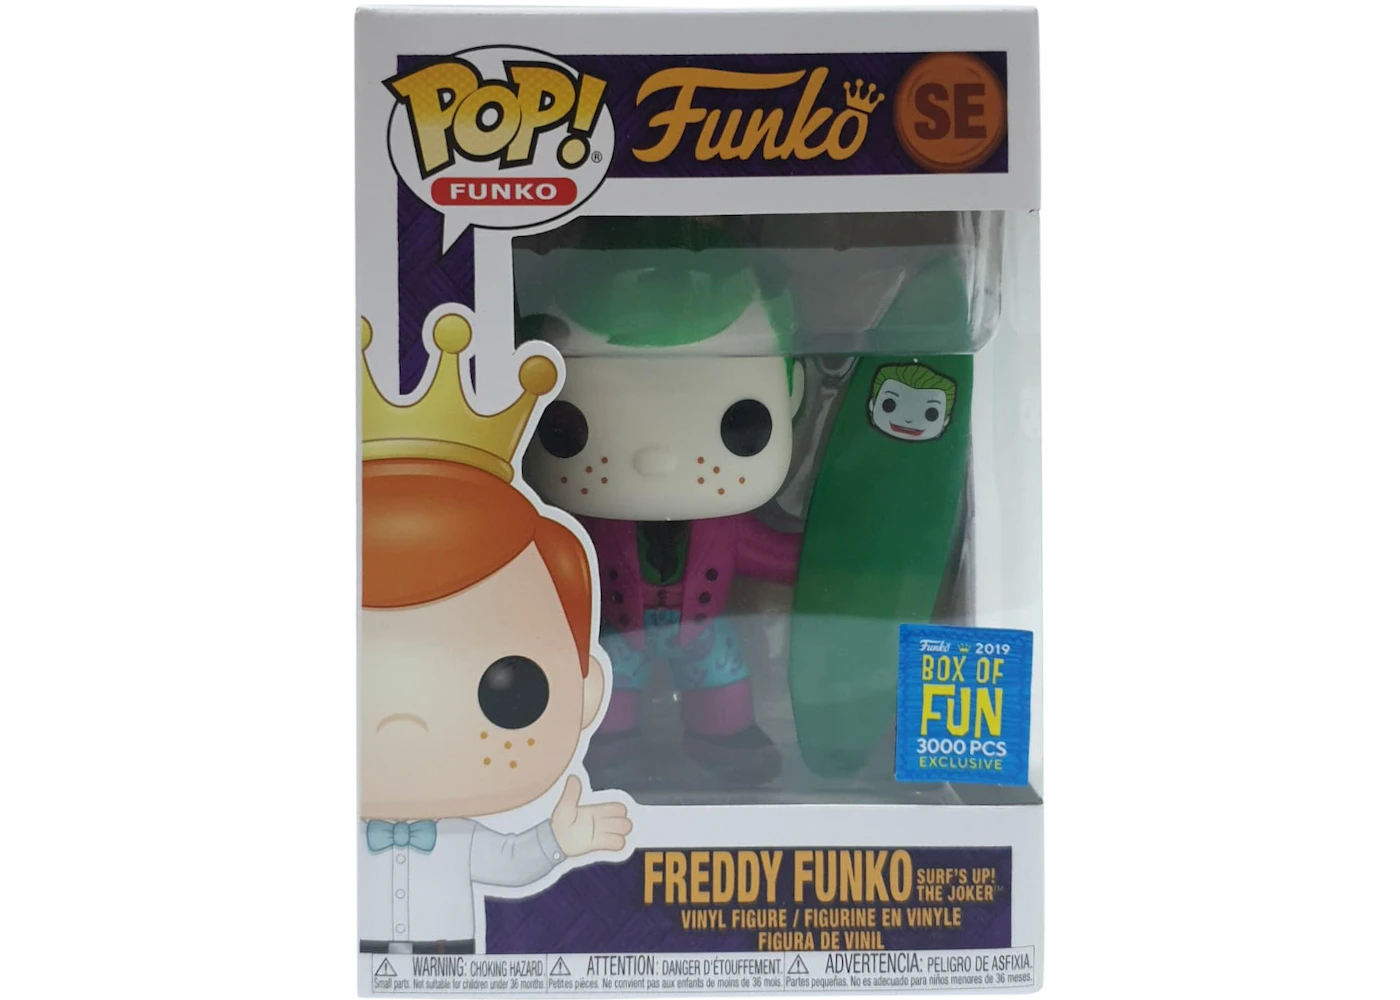 Pop! Freddy Funko Surf's Up! The Joker Box Fun Exclusive Special Edition - US